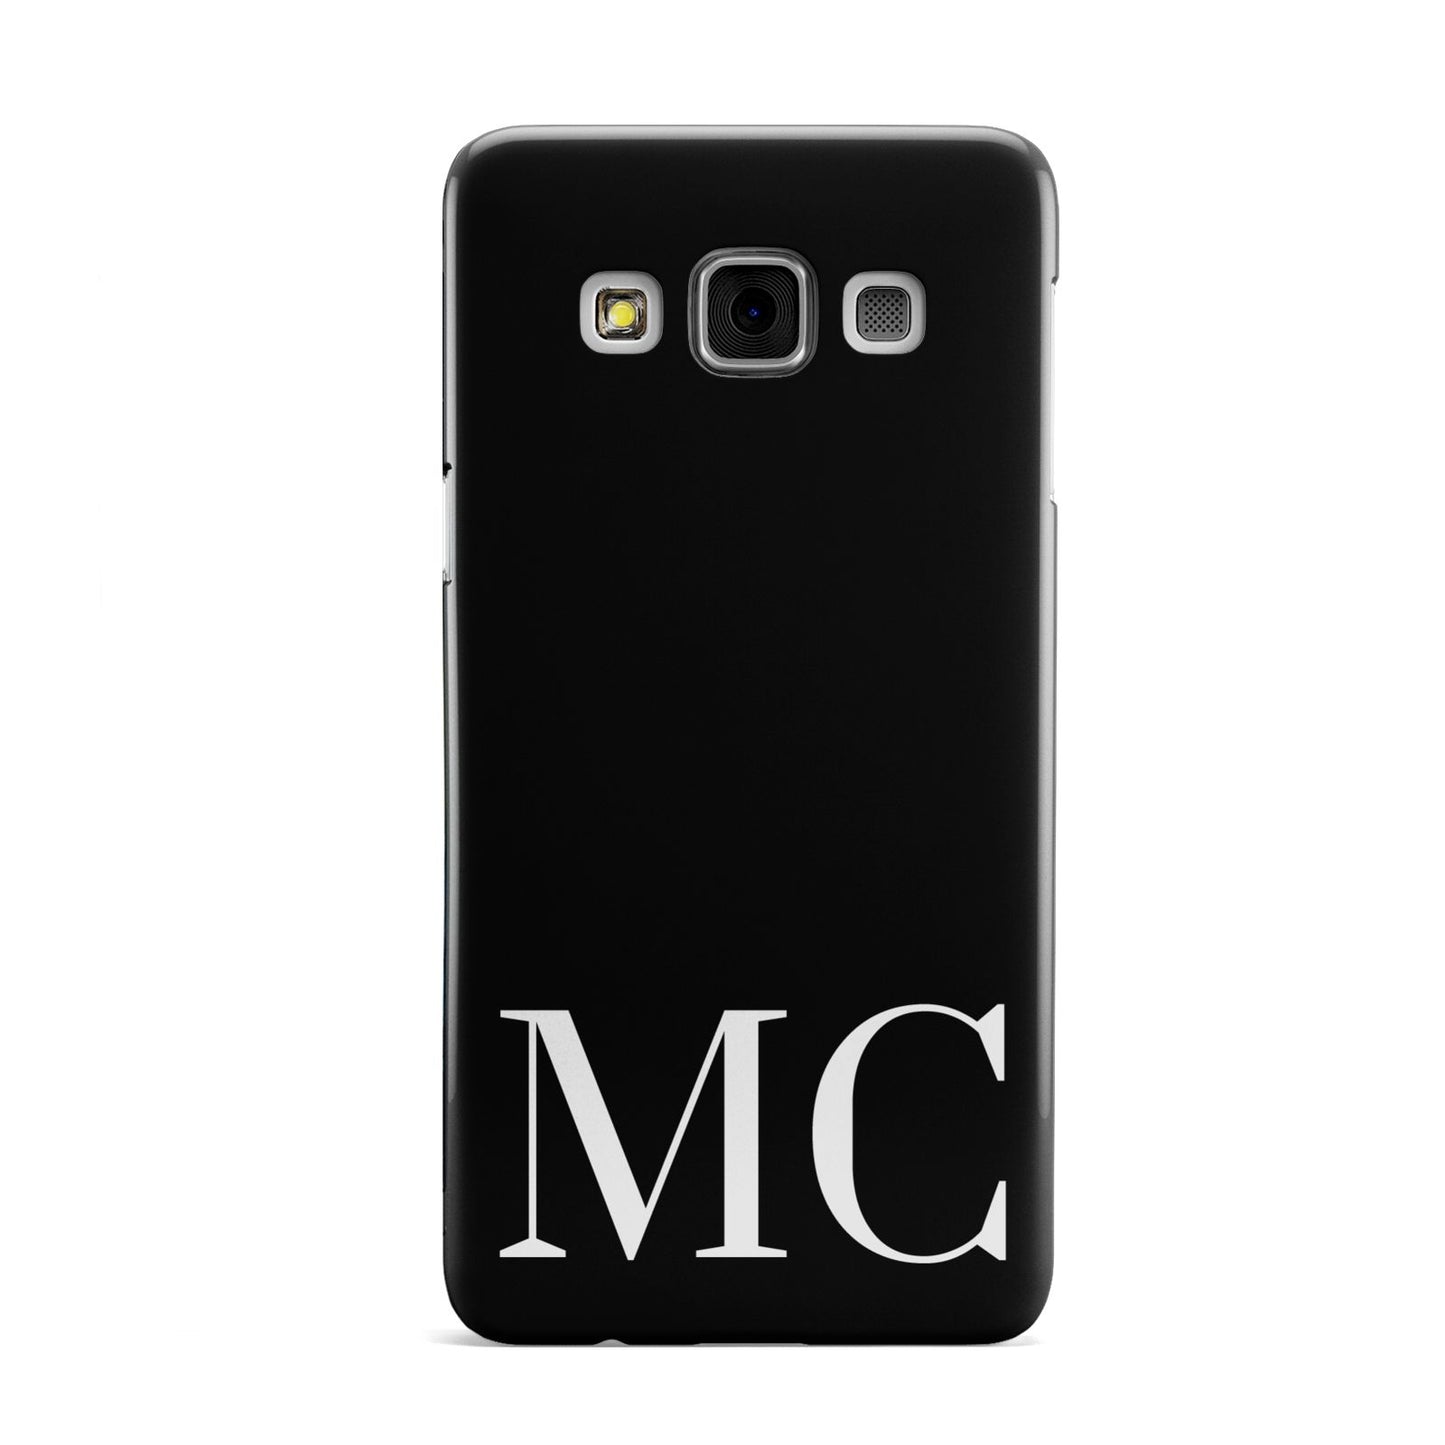 Initials Personalised 1 Samsung Galaxy A3 Case